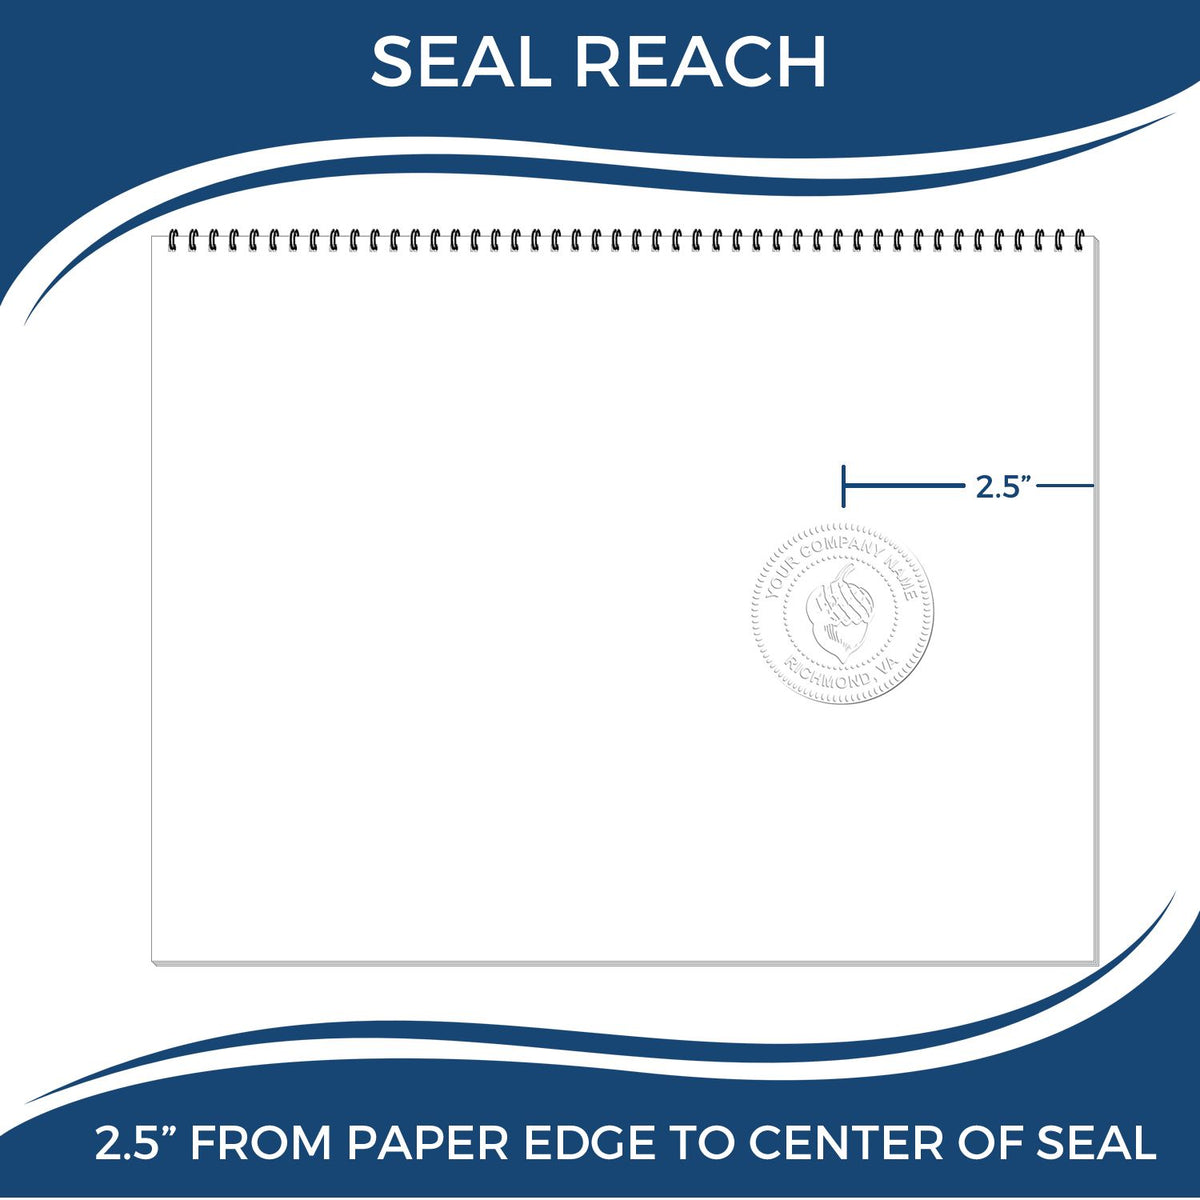 An infographic showing the seal reach which is represented by a ruler and a miniature seal image of the Long Reach Florida PE Seal